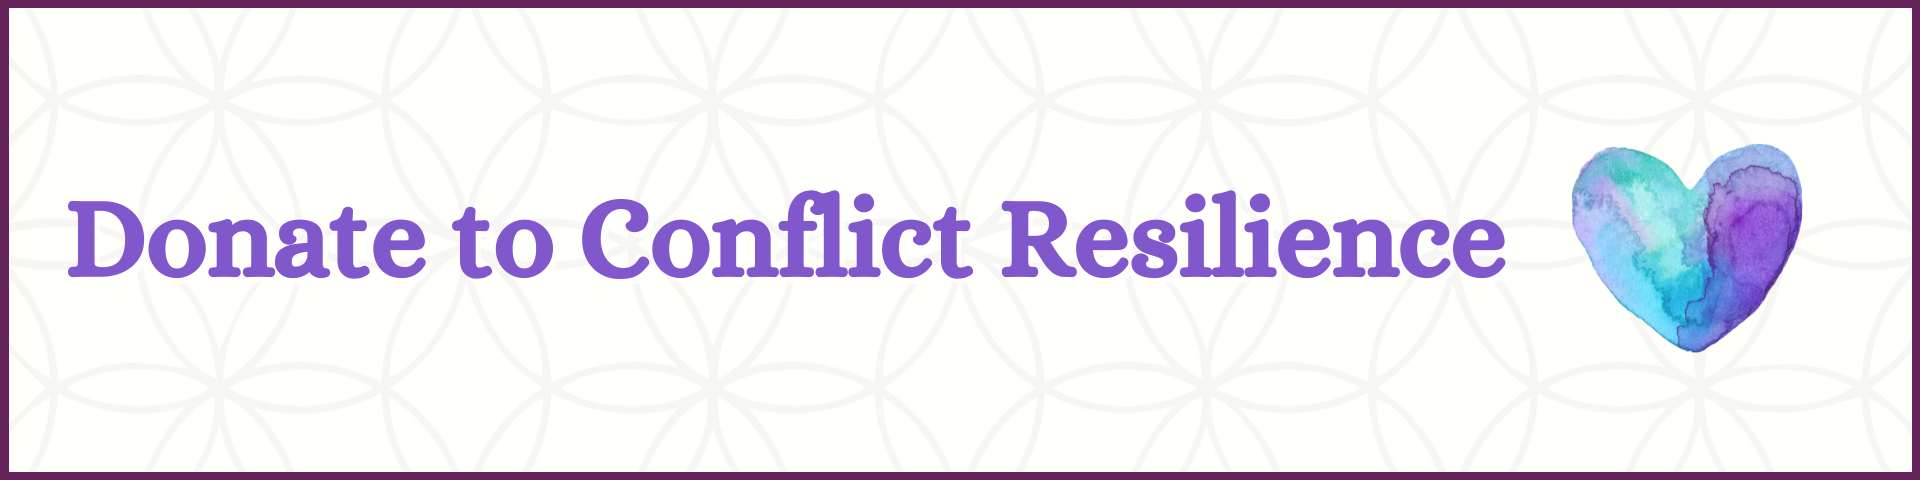 Donate to Conflict Resilience button